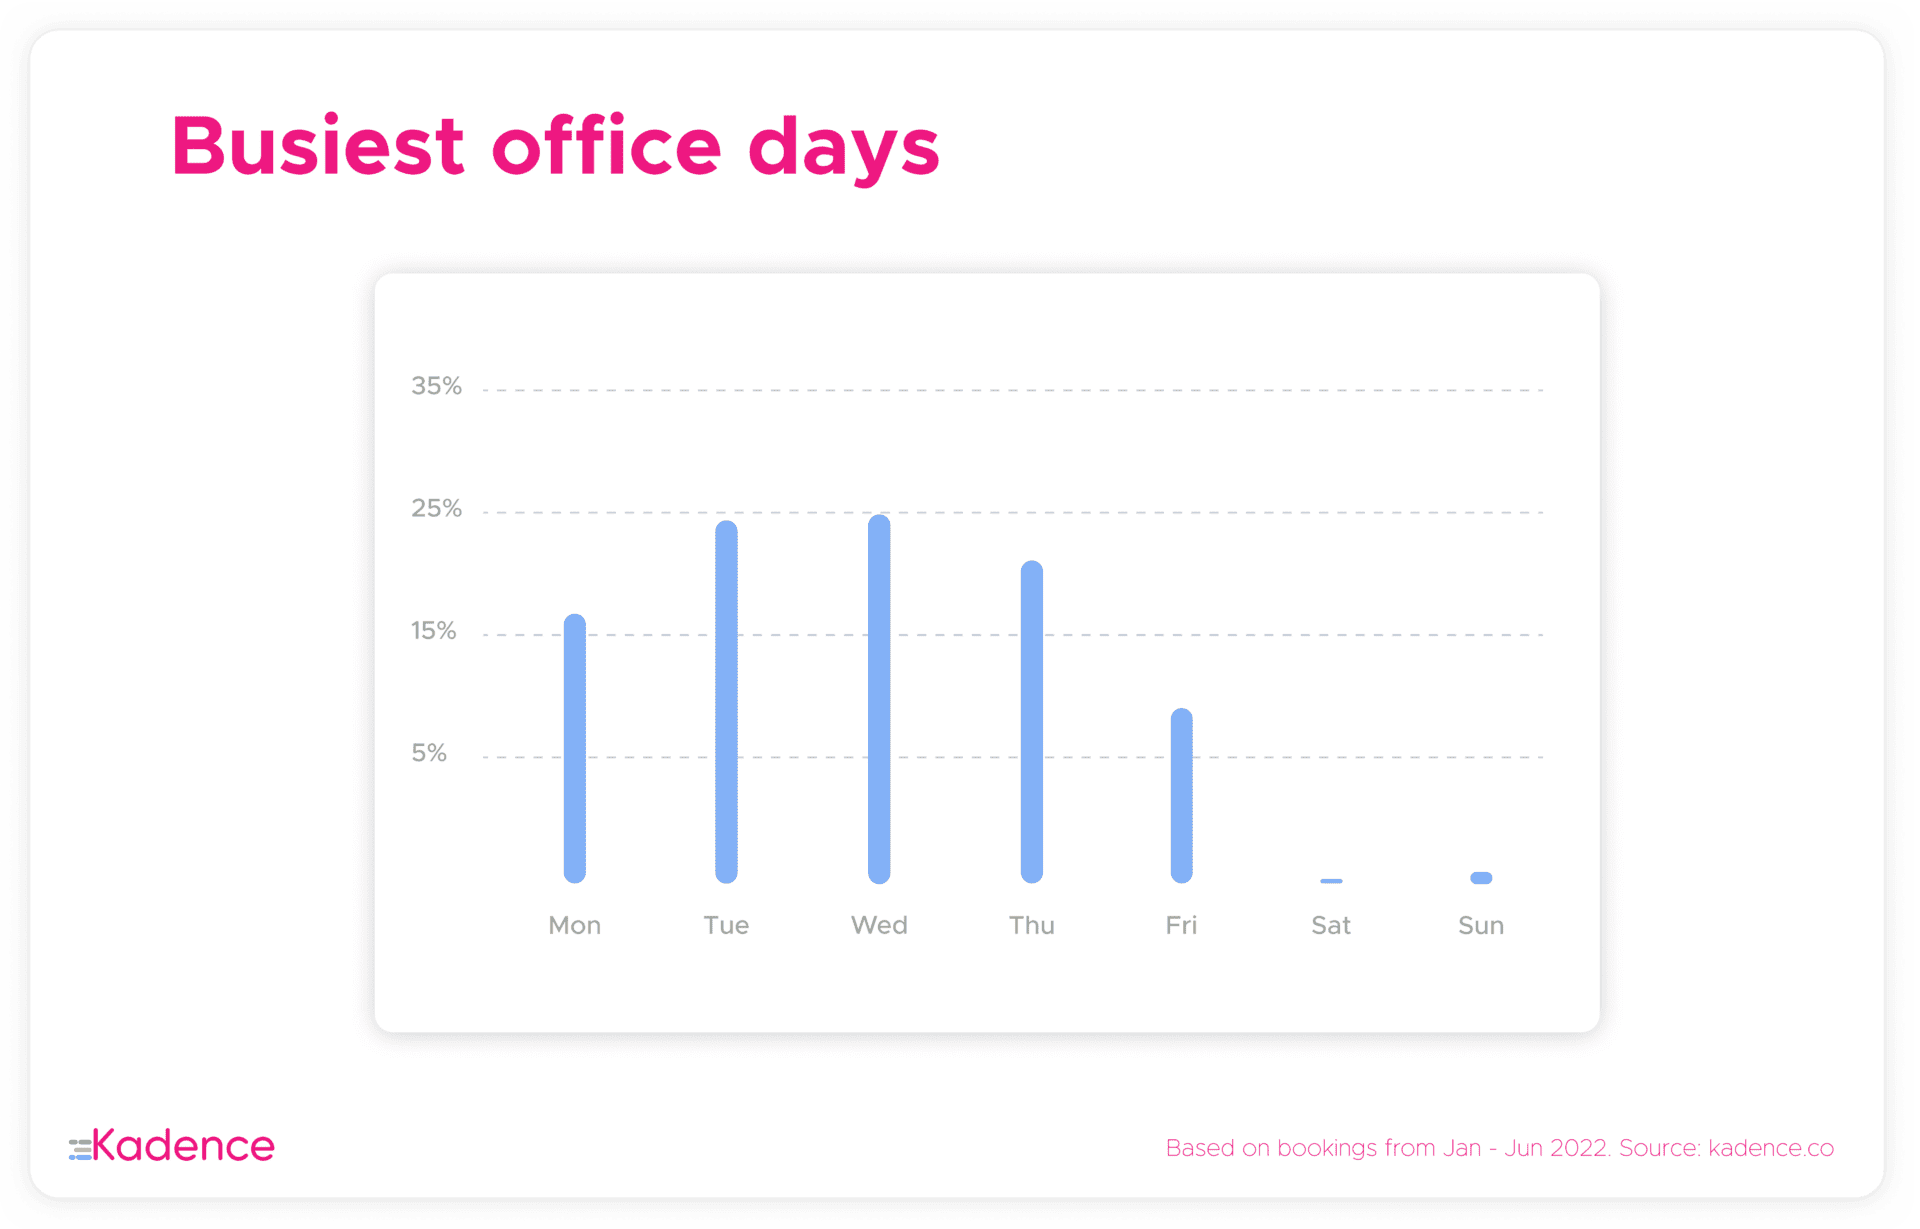 Busiest office days